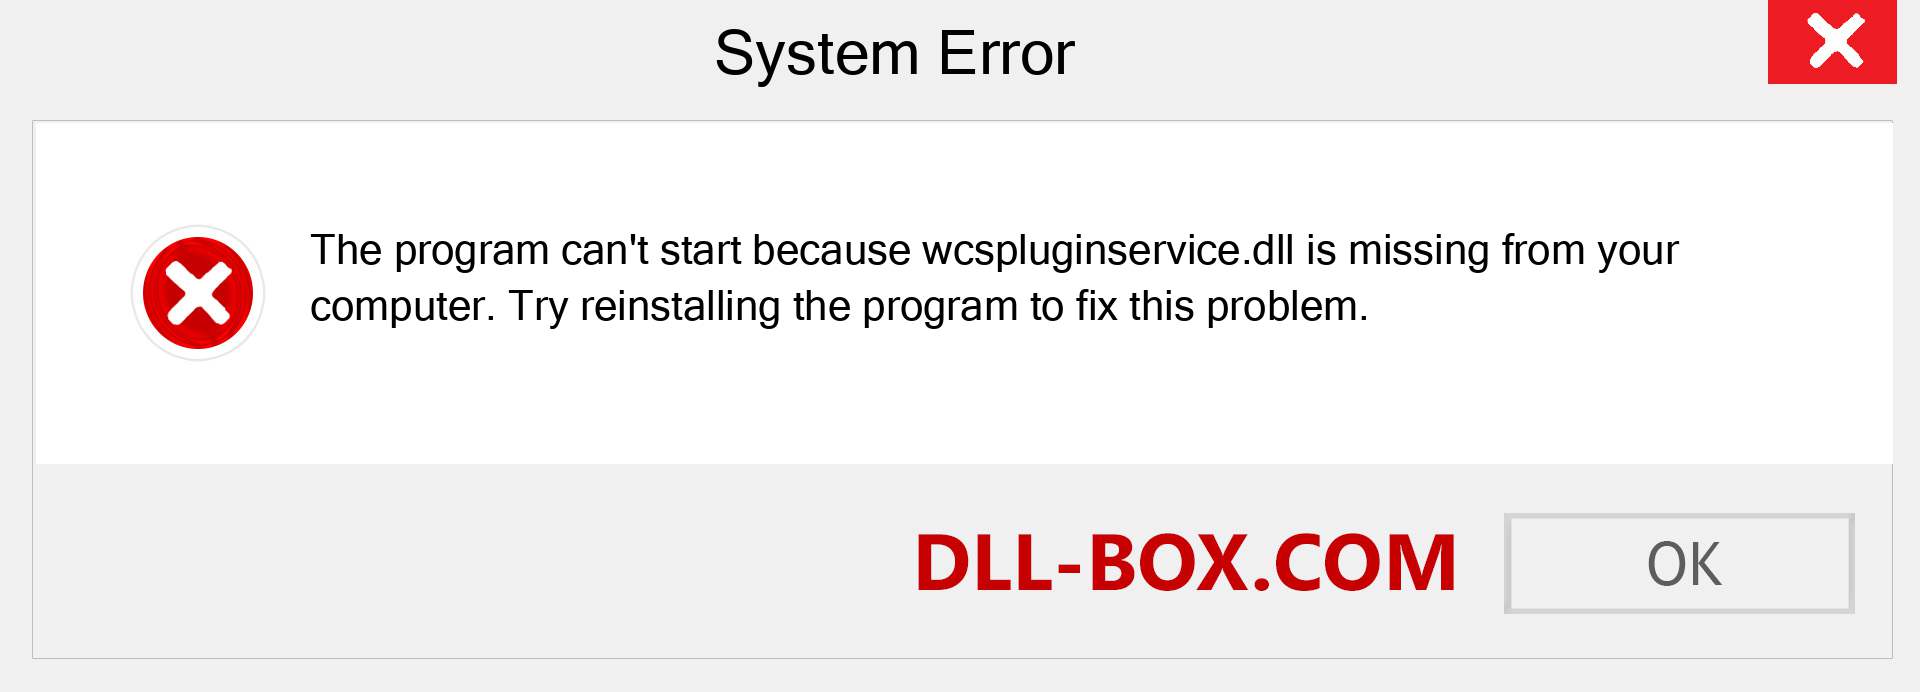  wcspluginservice.dll file is missing?. Download for Windows 7, 8, 10 - Fix  wcspluginservice dll Missing Error on Windows, photos, images